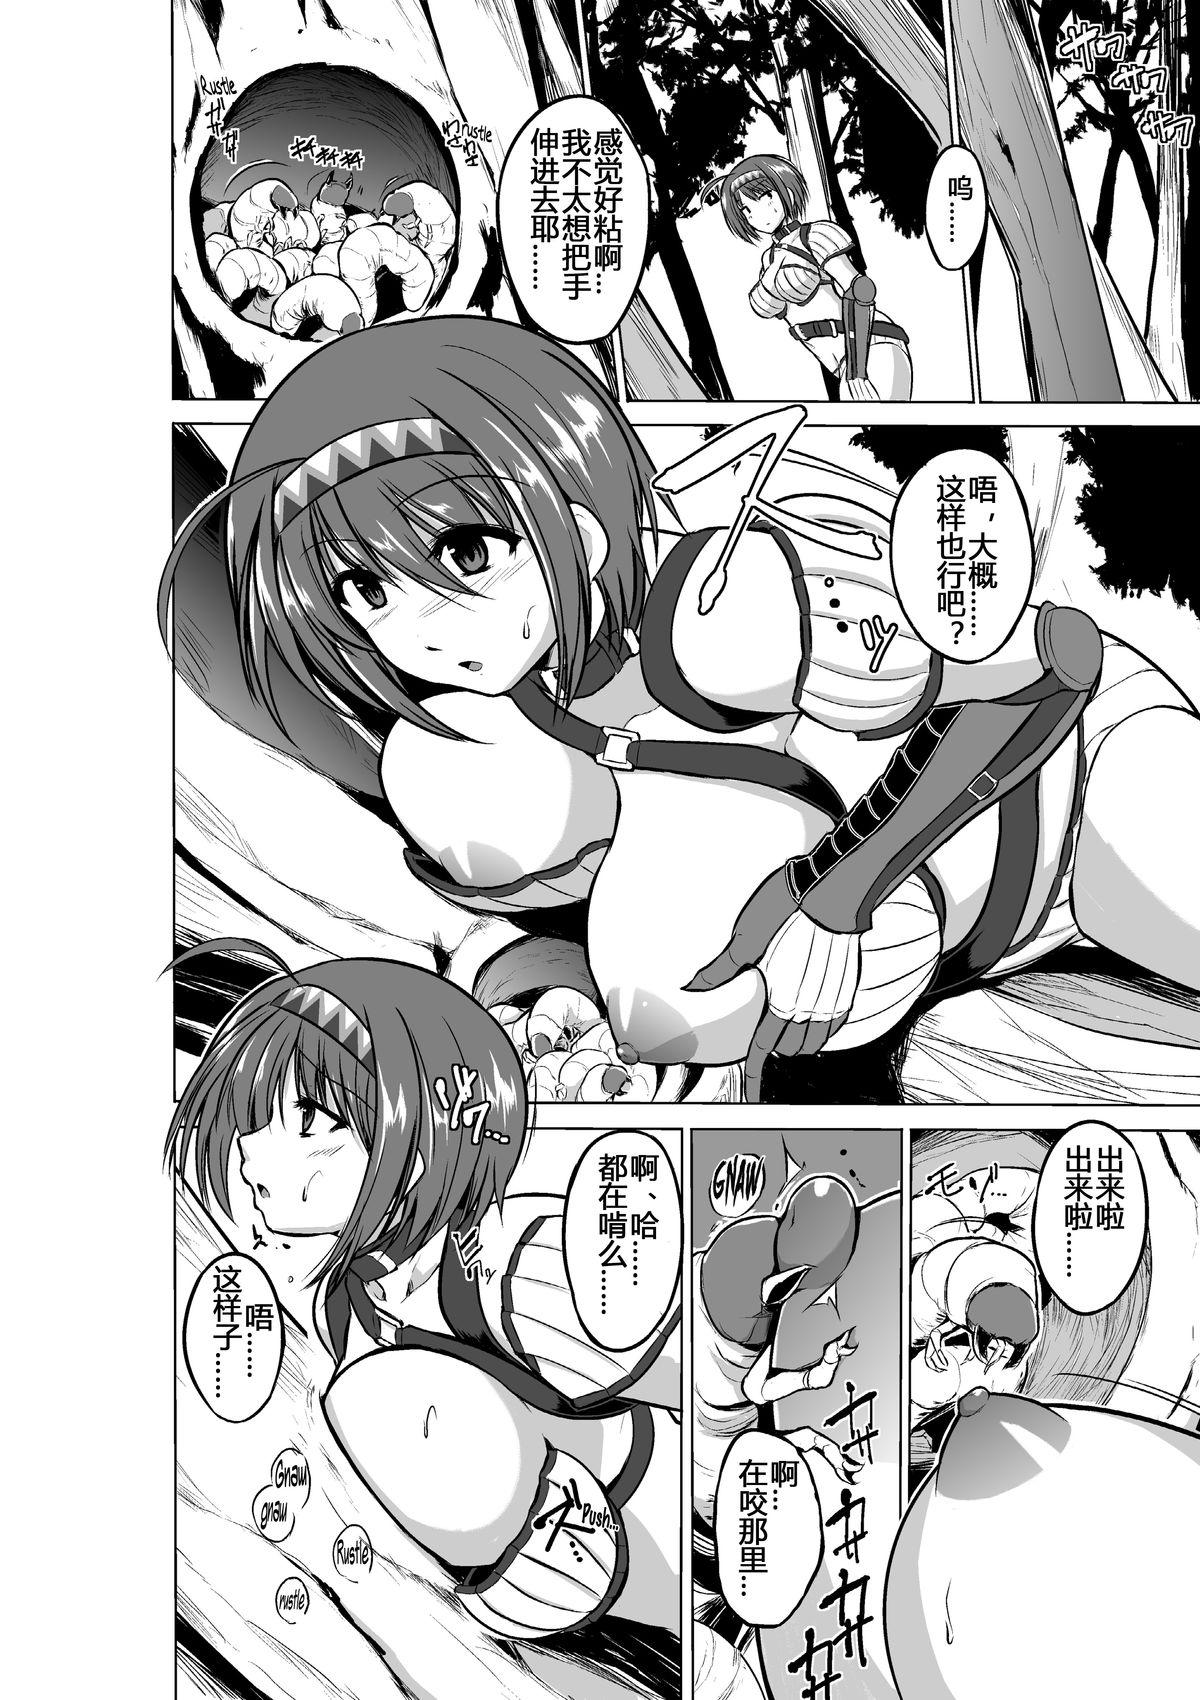 3some Dungeon Travelers - Chie no Himegoto - Toheart2 Doctor - Page 6